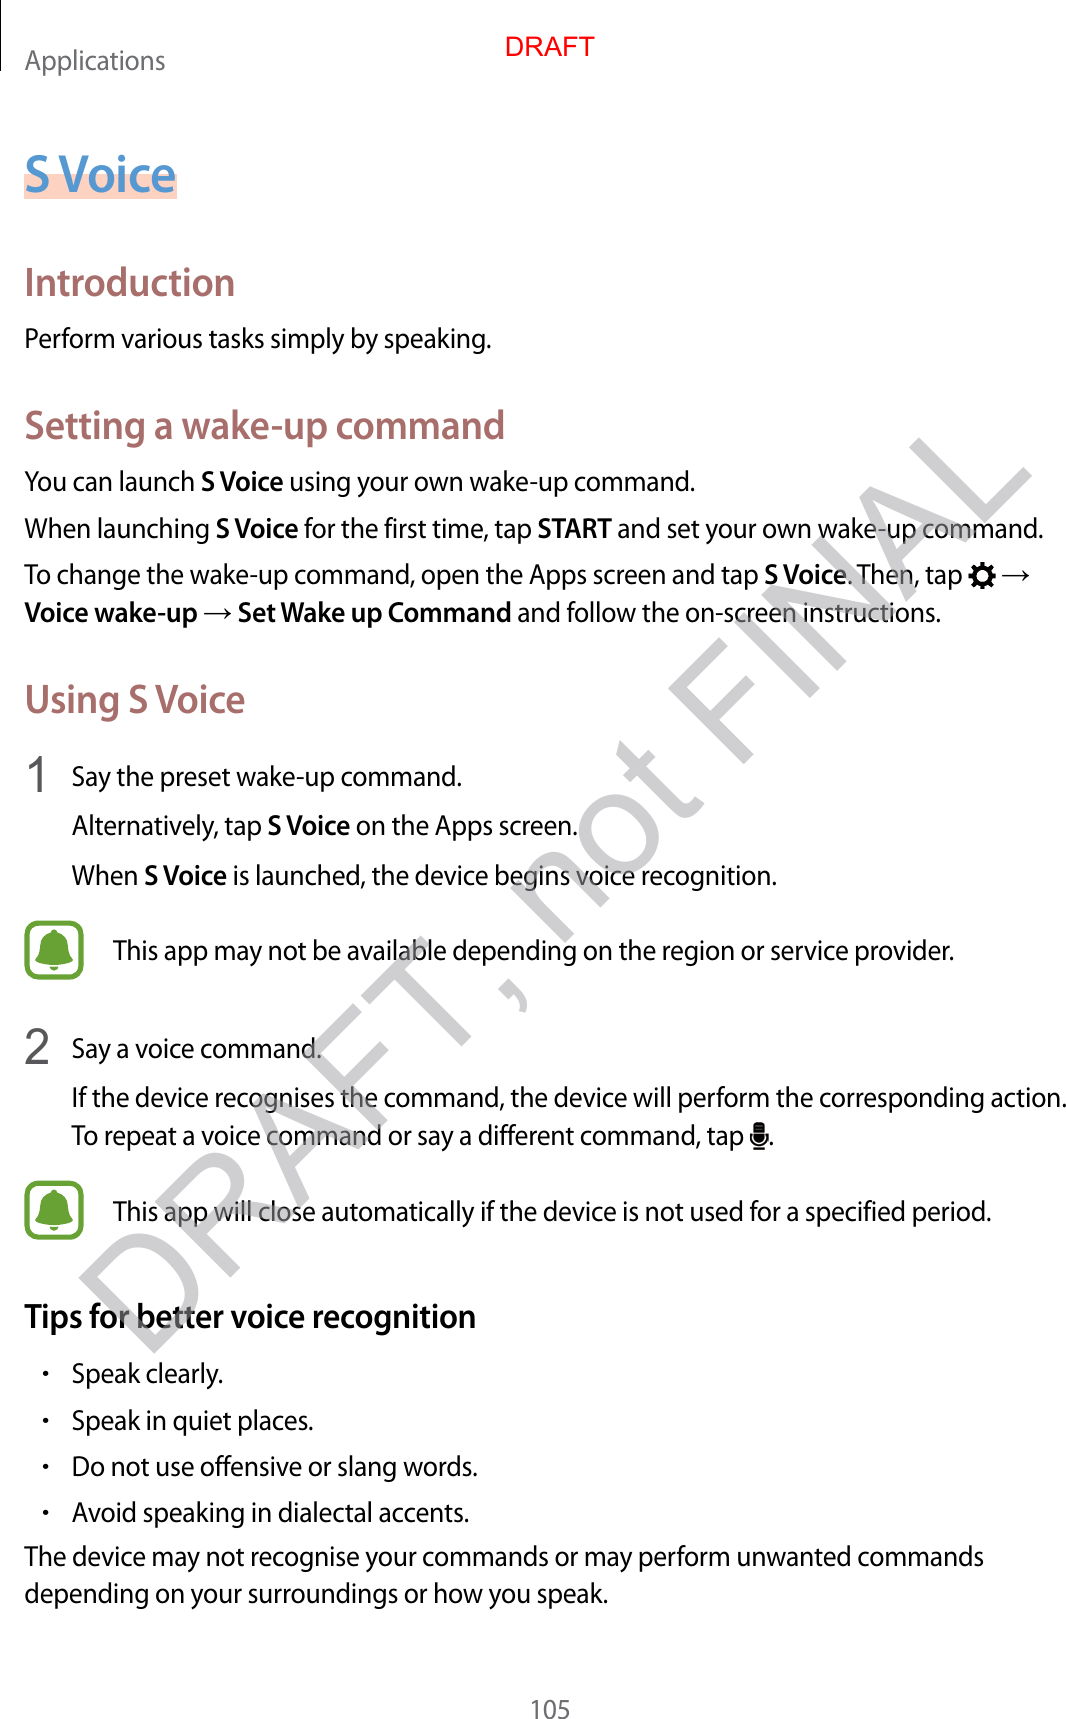 Applications105S V oiceIntroductionP erform various tasks simply by speaking.Setting a wake-up commandYou can launch S V oice using your own w ake-up command.When launching S V oice for the first time , tap START and set your own w ake-up command.To change the wake-up command, open the A pps scr een and tap S V oice. Then, tap    Voice wak e-up  Set Wake up Command and follo w the on-scr een instructions.Using S Voice1  Say the preset w ake-up command .Alternativ ely, tap S V oice on the Apps screen.When S V oice is launched, the device beg ins v oic e r ecog nition.This app may not be a vailable depending on the r eg ion or service provider.2  Say a voic e command .If the device recog nises the command , the devic e will perform the c orresponding action. To repeat a v oic e command or sa y a diff er en t command , tap  .This app will close automatically if the devic e is not used f or a specified period .T ips f or bett er v oic e r ec ognition•Speak clearly.•Speak in quiet places.•Do not use offensiv e or slang w or ds .•A v oid speaking in dialectal accen ts .The device ma y not r ecog nise y our c ommands or may perform unwant ed c ommands depending on your surroundings or ho w y ou speak.DRAFT, not FINALDRAFT